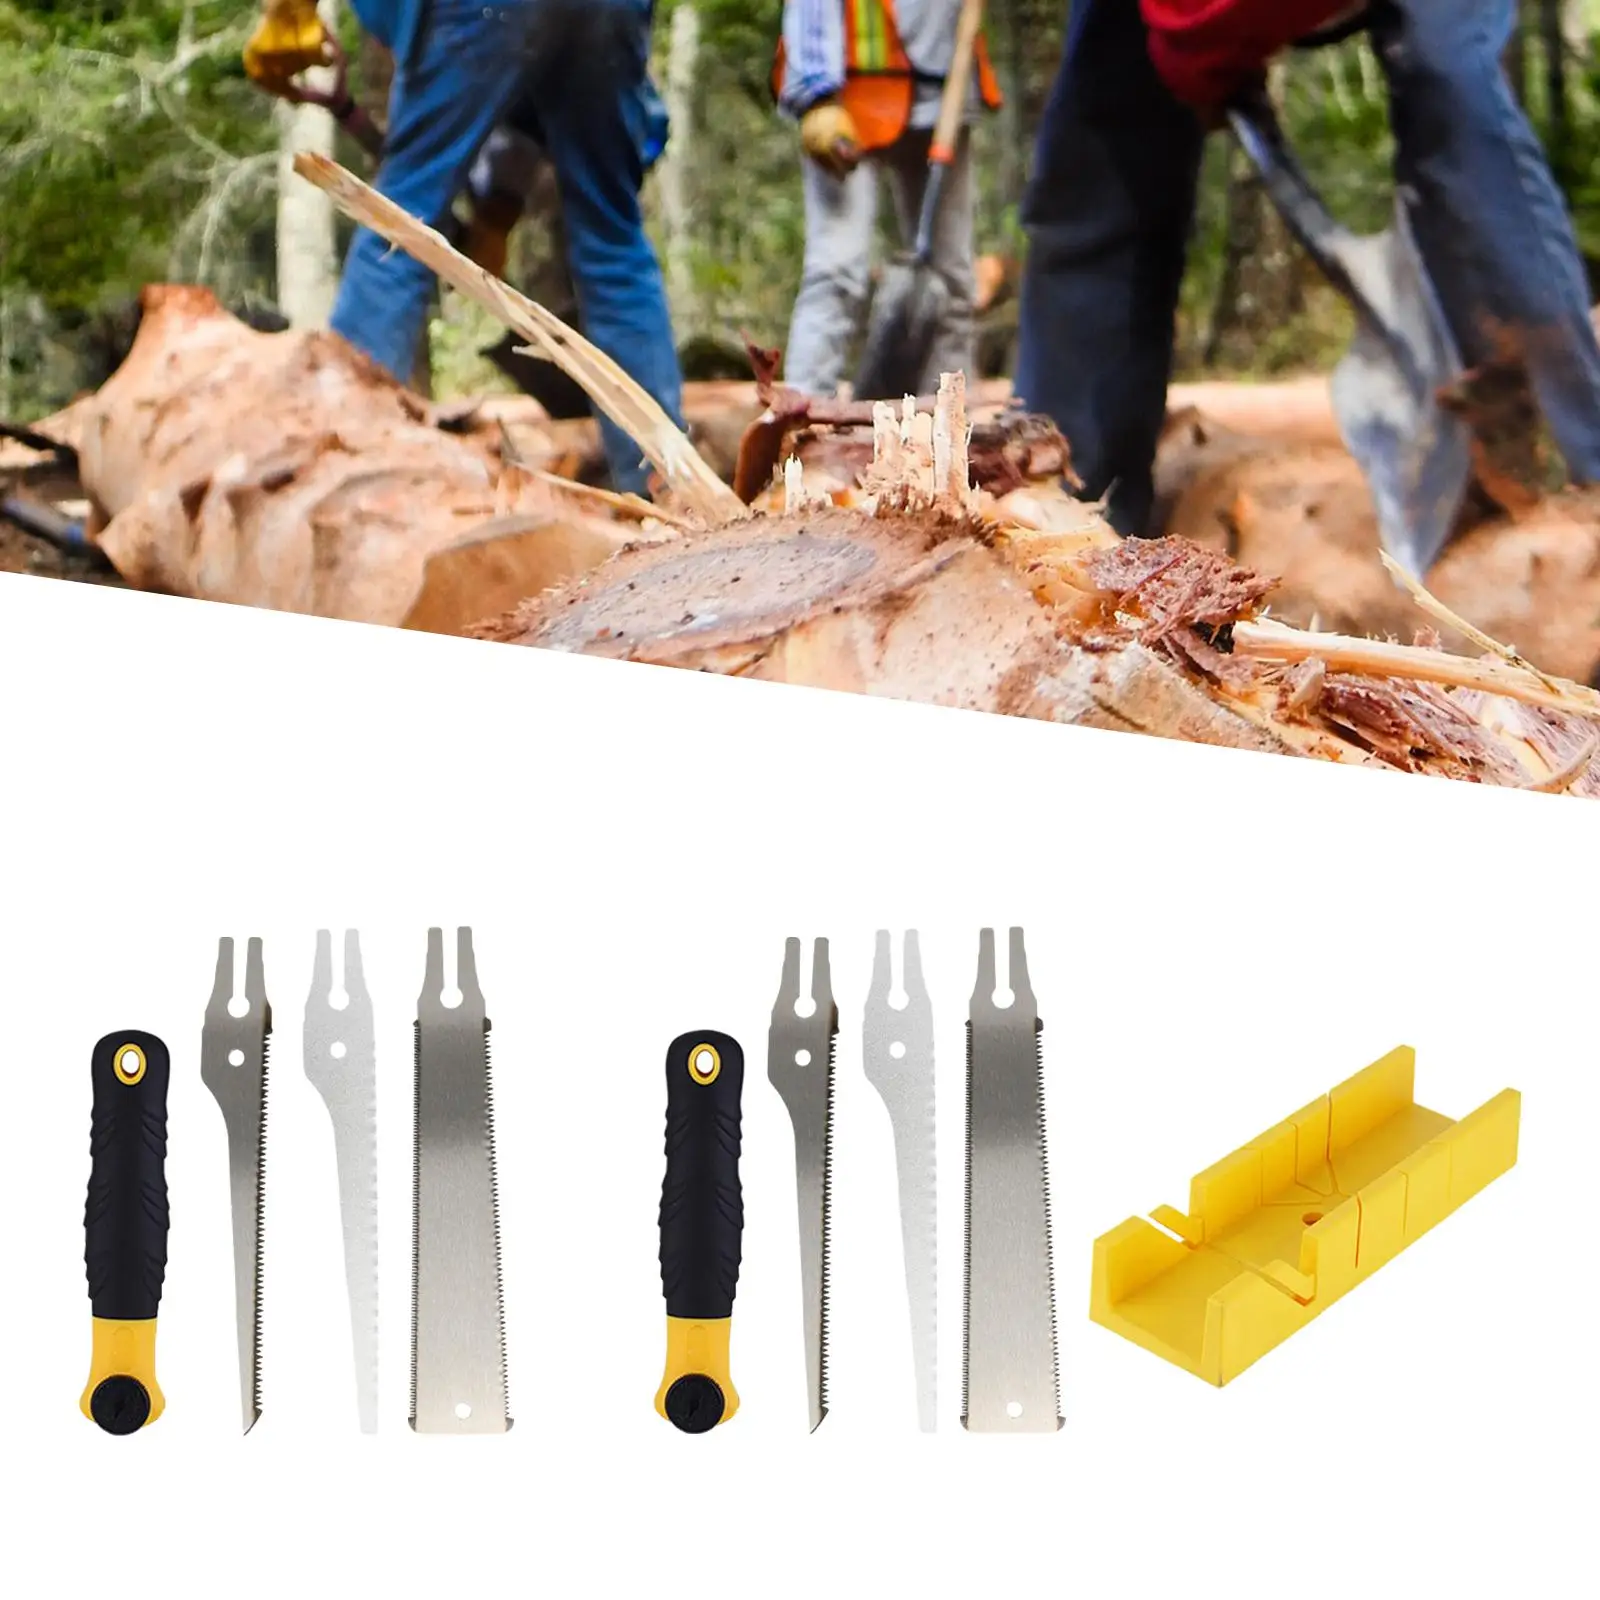 Manual Hand Saw Handheld Woodworking Tool Comfortable Handle Garden Tool Pruning Hand Saw for Gardening Home Outdoor DIY Cutting